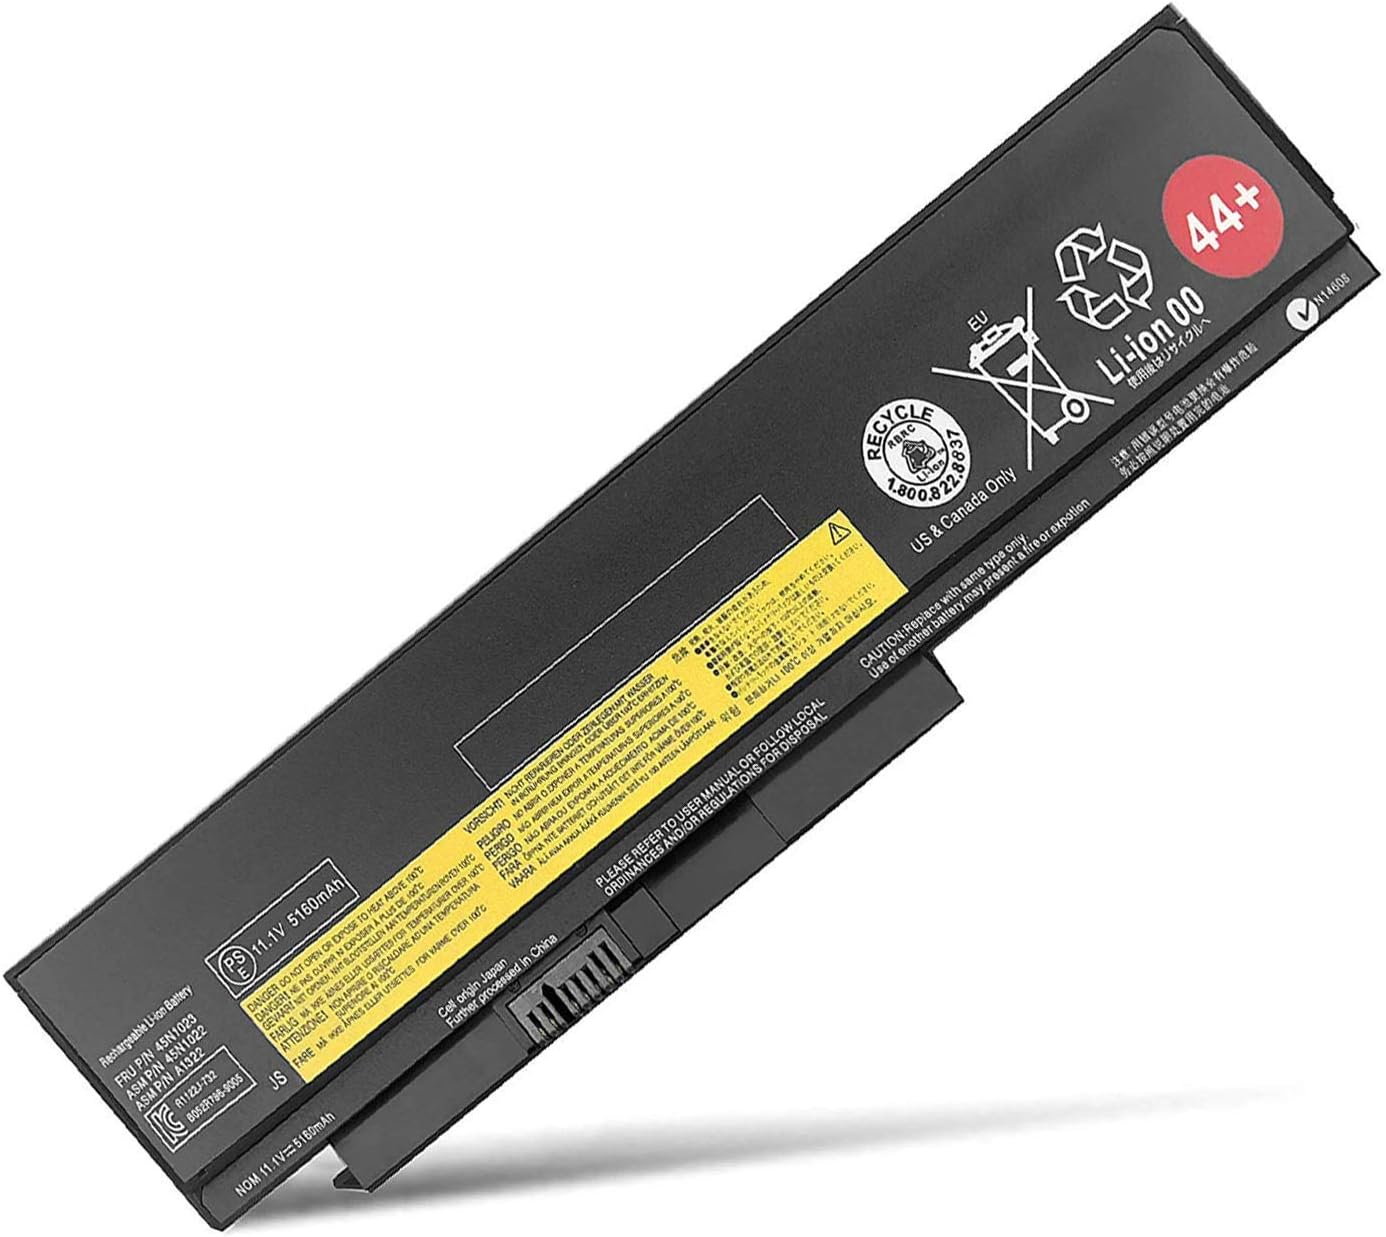 Techie Compatible Battery for Lenovo X220 - ThinkPad X220, X220i, X220s series Laptops (4000mAh, 6-Cell)